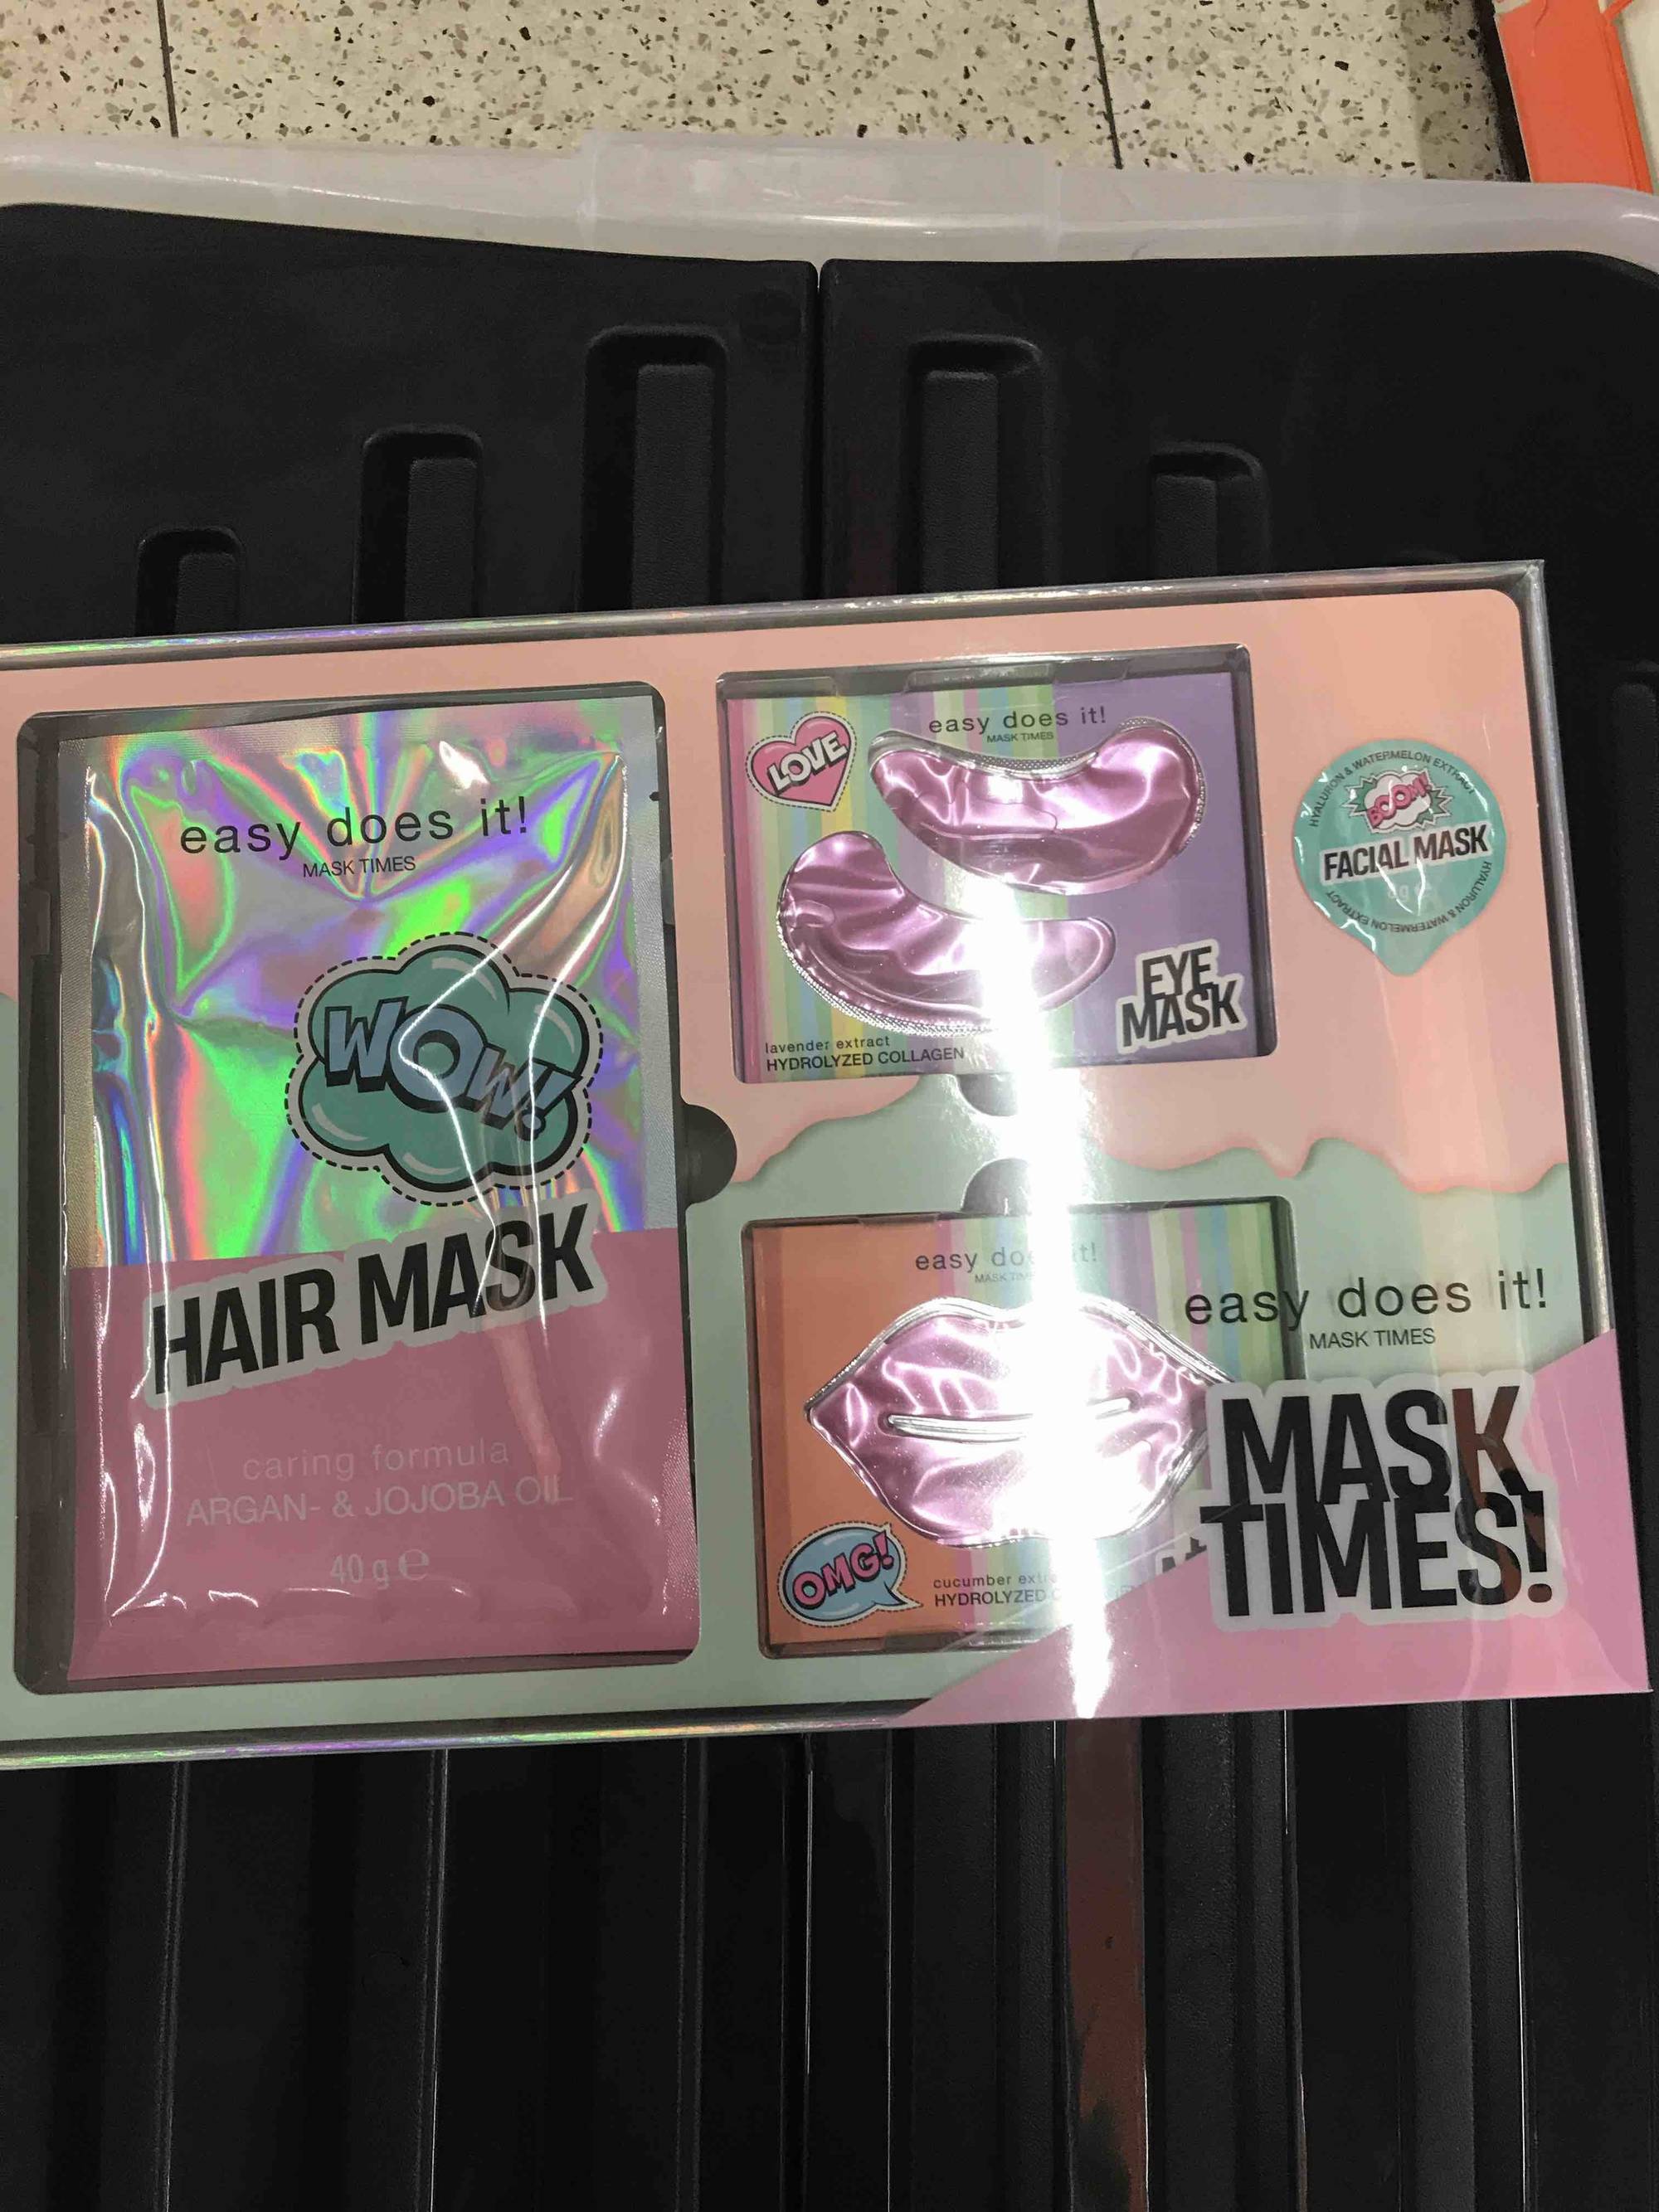 LOVE - Easy does it! Mask times - Hair mask